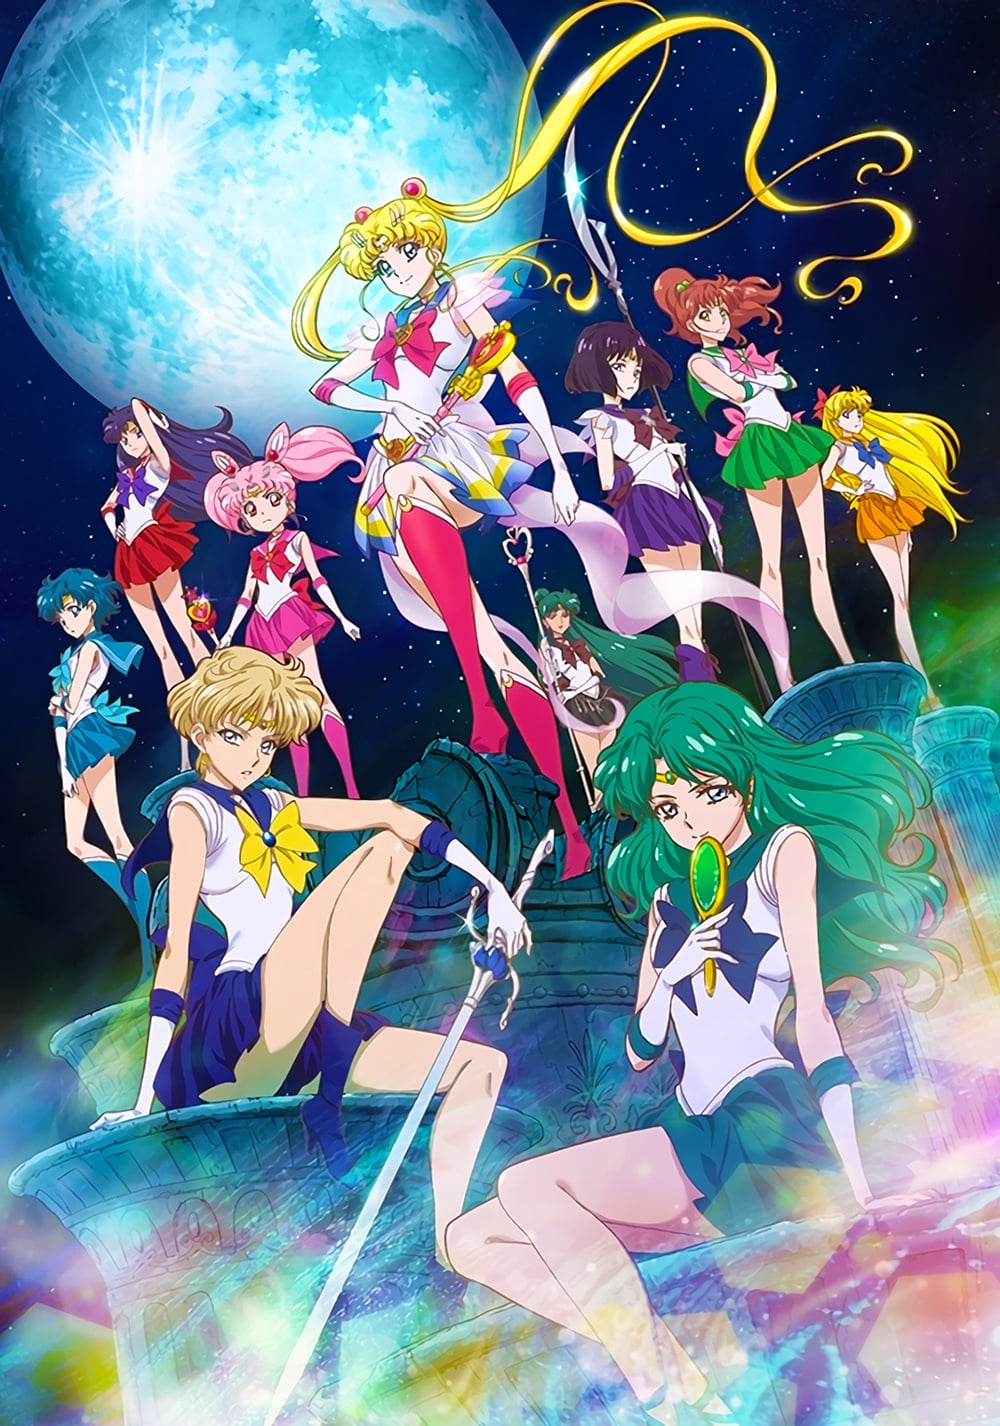 Sailor Moon Crystal Picture